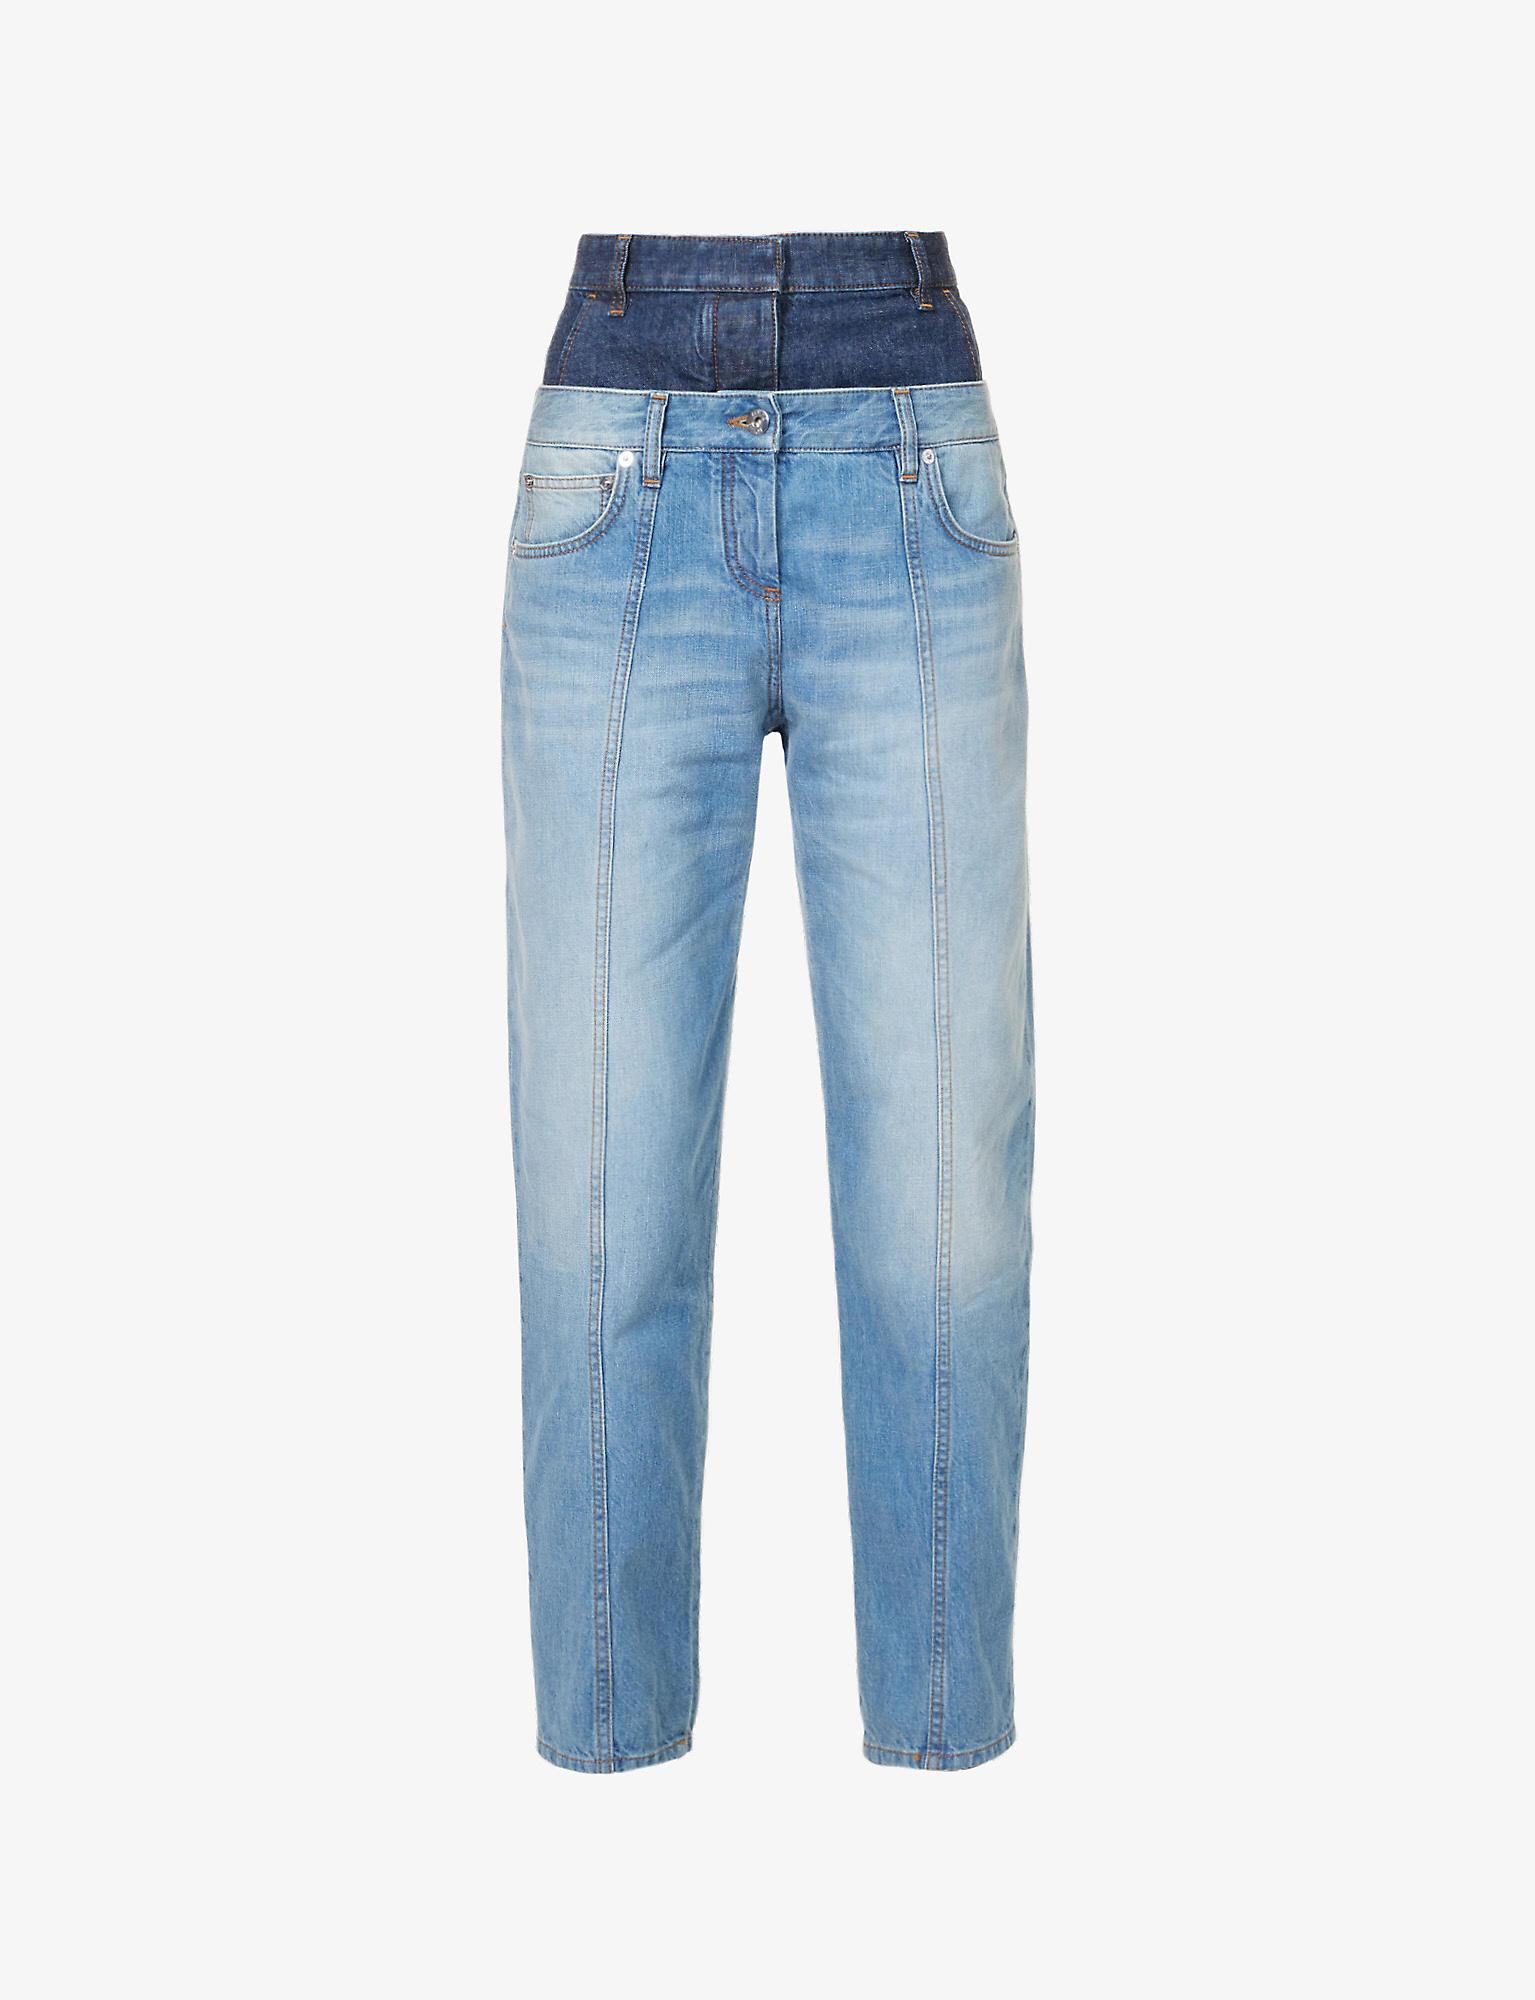 Loewe Trompe L'oeil Double-waistband Tapered High-rise Denim Jeans in Blue  | Lyst